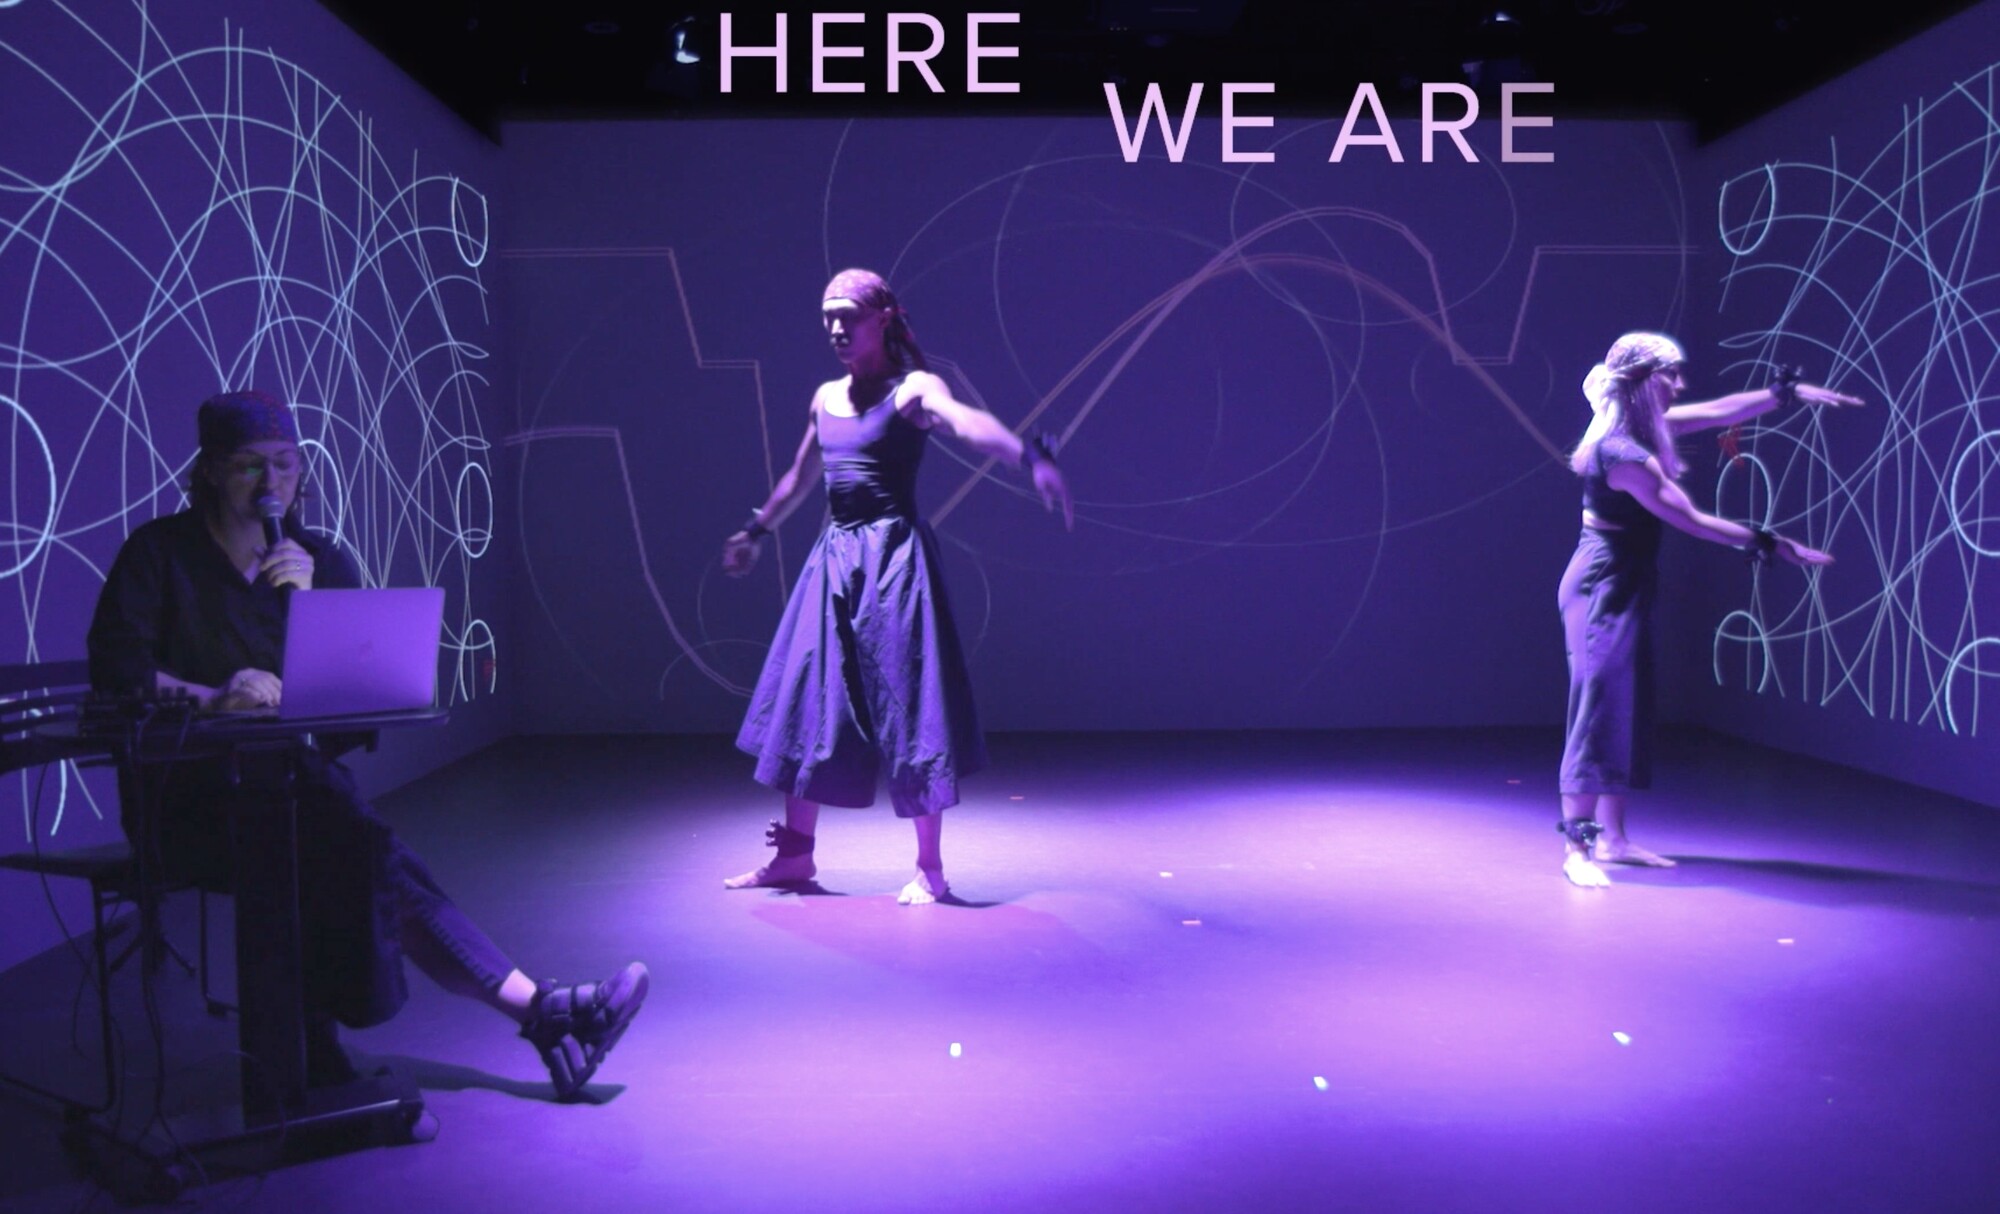 The actors perform in a brightly lit purple space. 